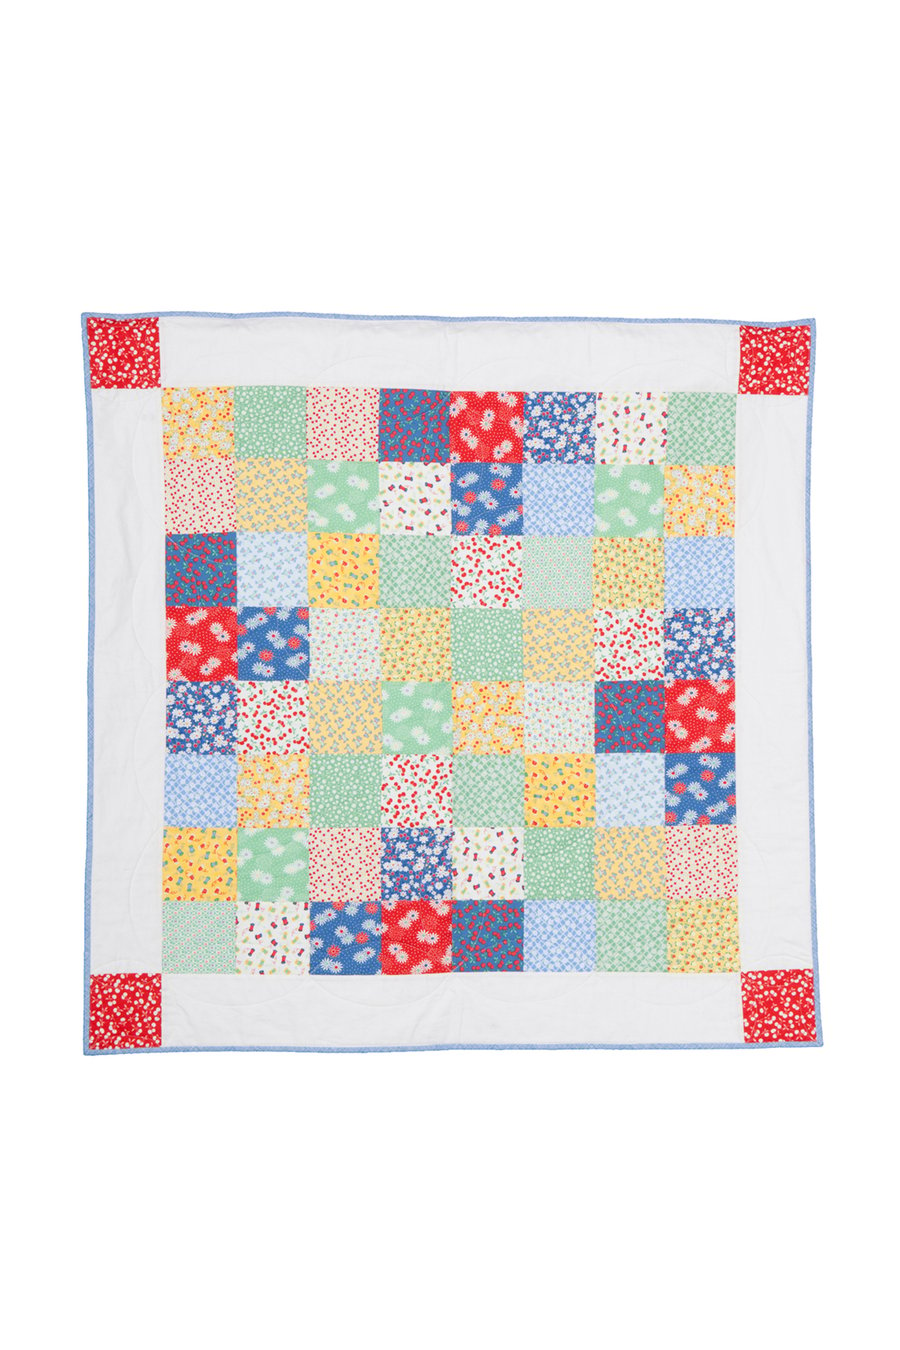 30s Retro Patchwork Quilted Blanket Throw Playmat